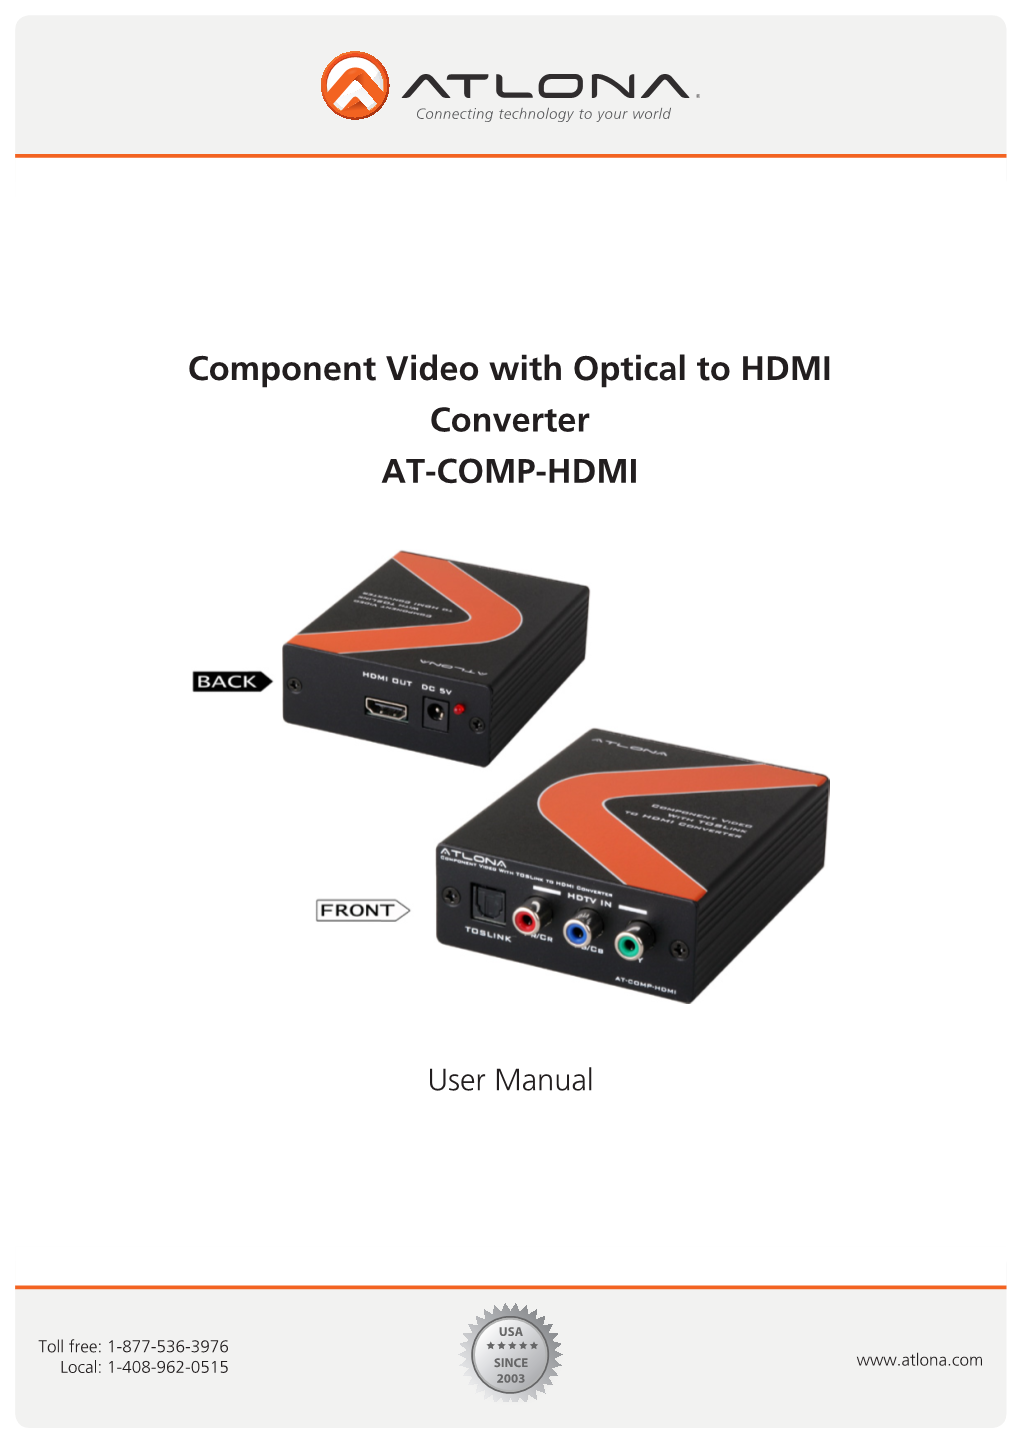 Component Video with Optical to HDMI Converter AT-COMP-HDMI